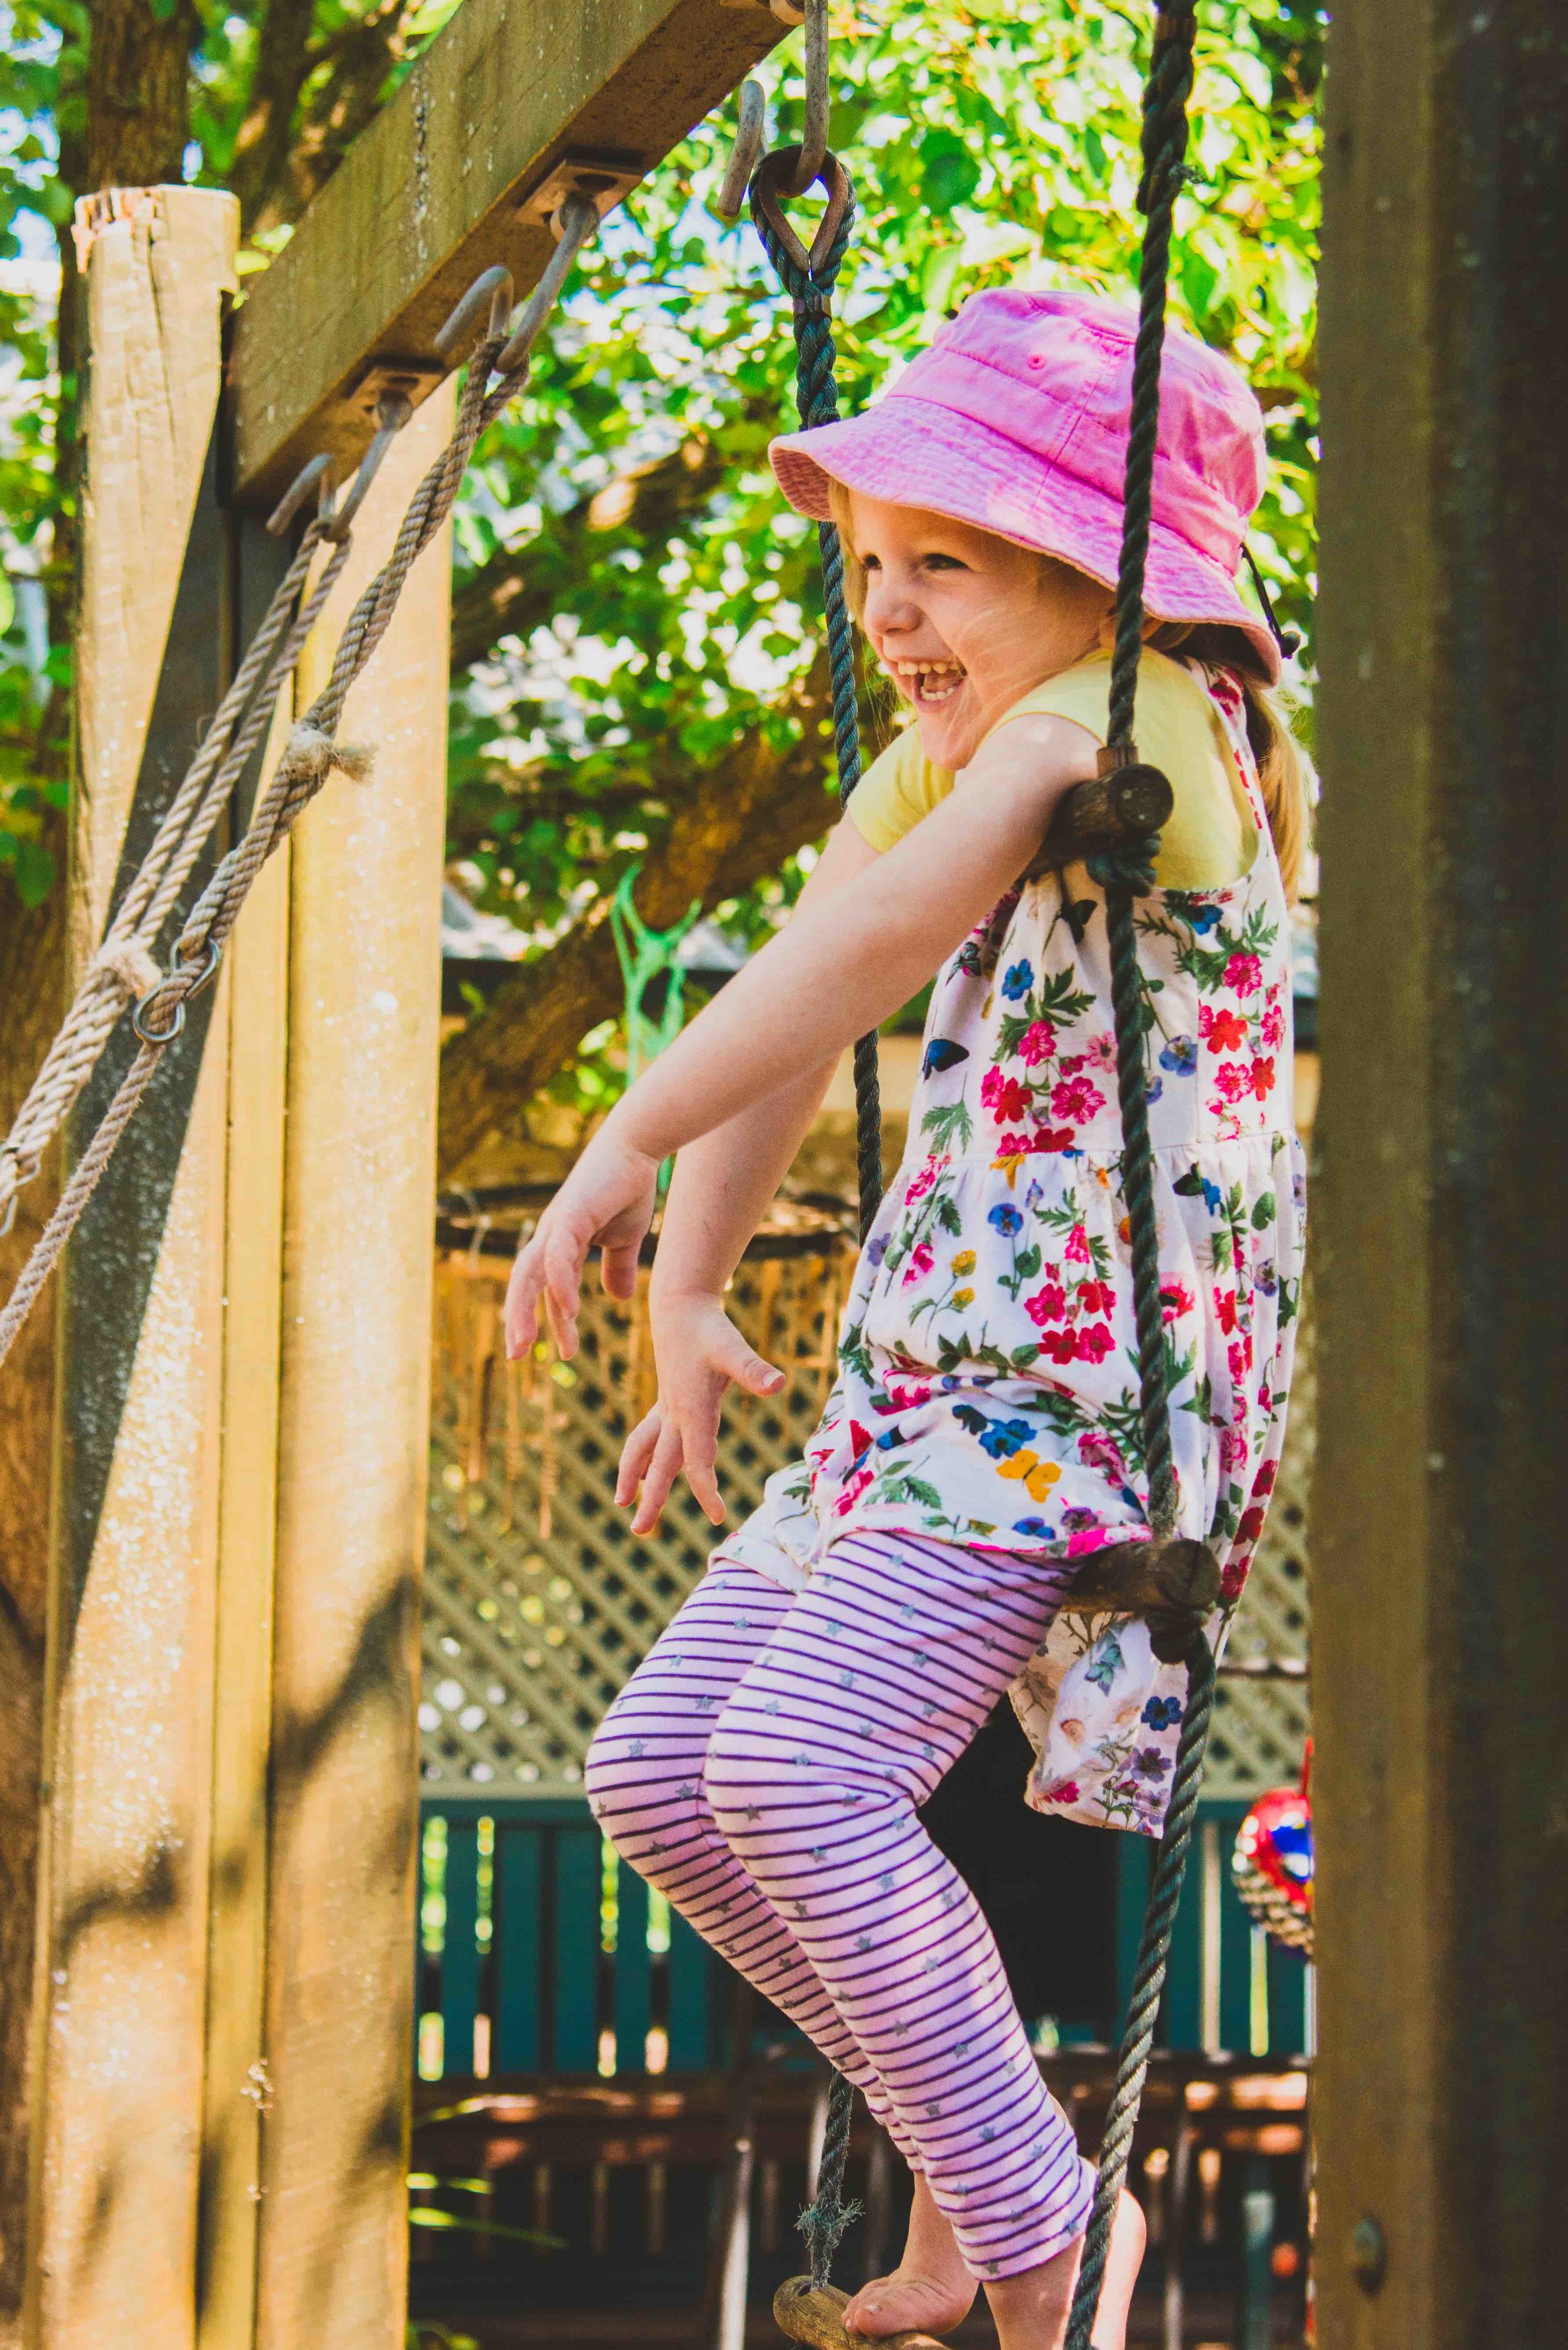 Little girl in pink hat laughing with joy on rope ladder